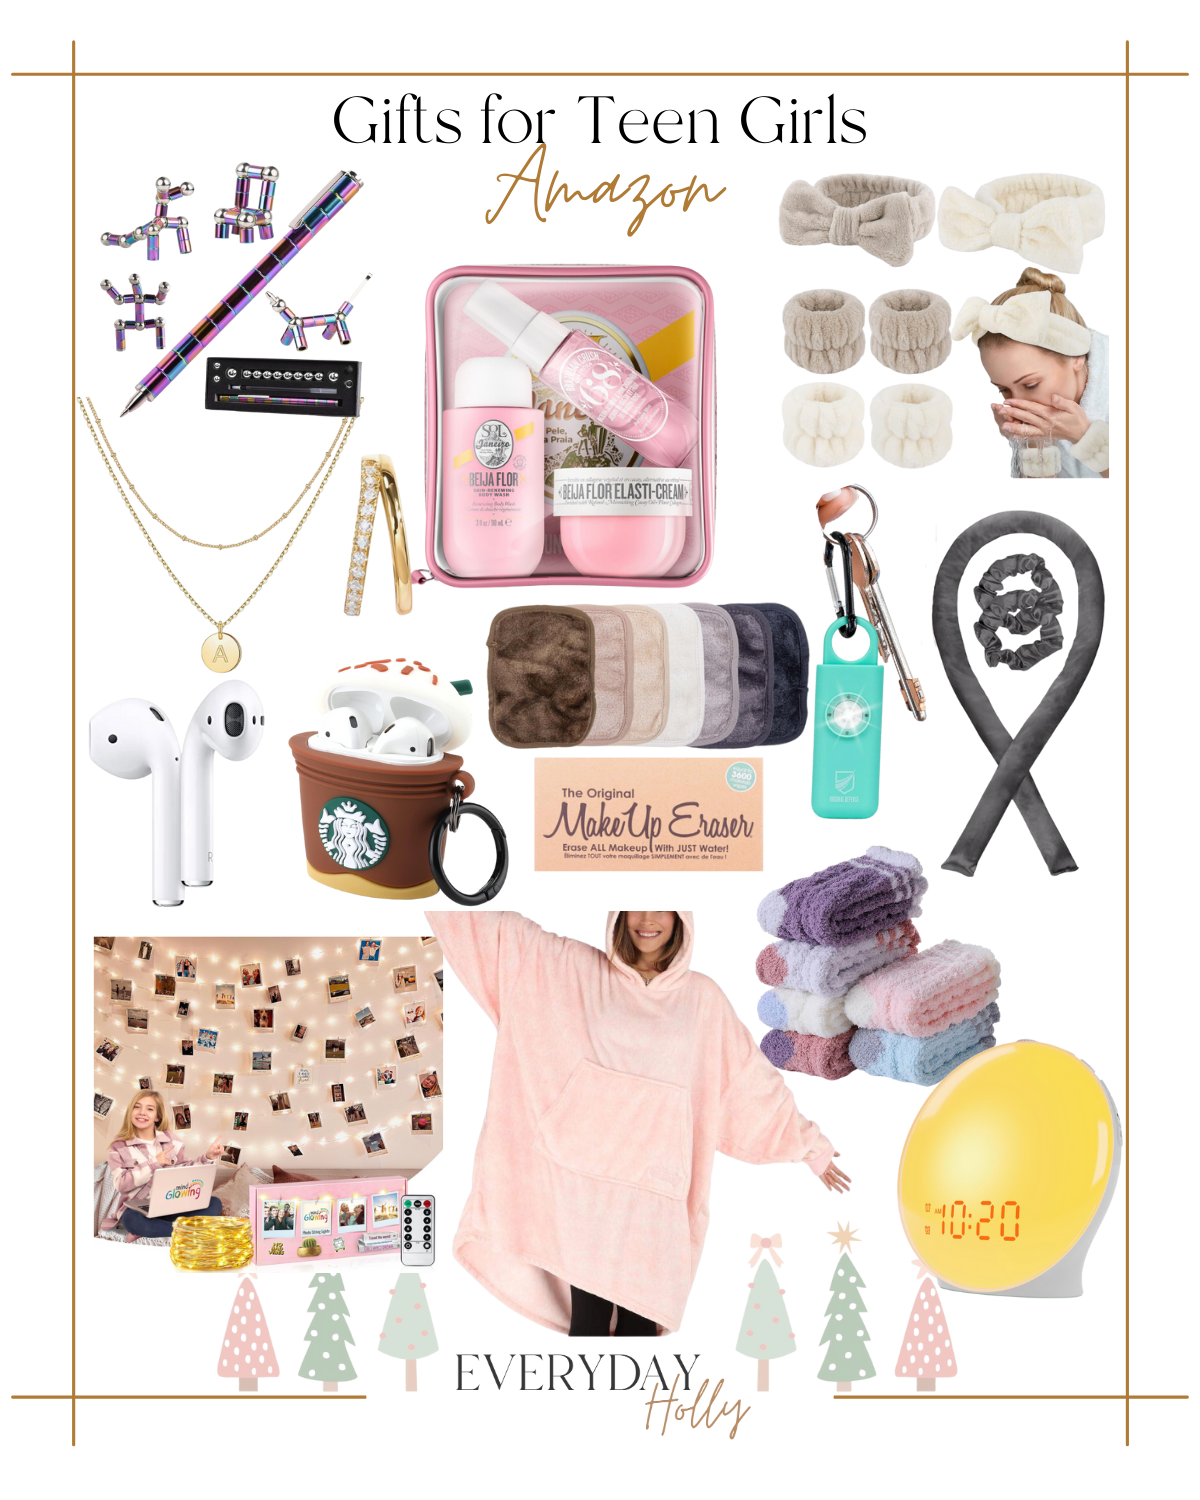 10 Holiday Gift Guides for Everyone This Season | #holiday #giftguide #giftideas #2023 #christmas #gifts #amazon #giftsforteengirls #giftsfortween #necklace #earring #beauty #makeup #spa #airpods #heatlesscurlers #fuzzysocks #alarmclock